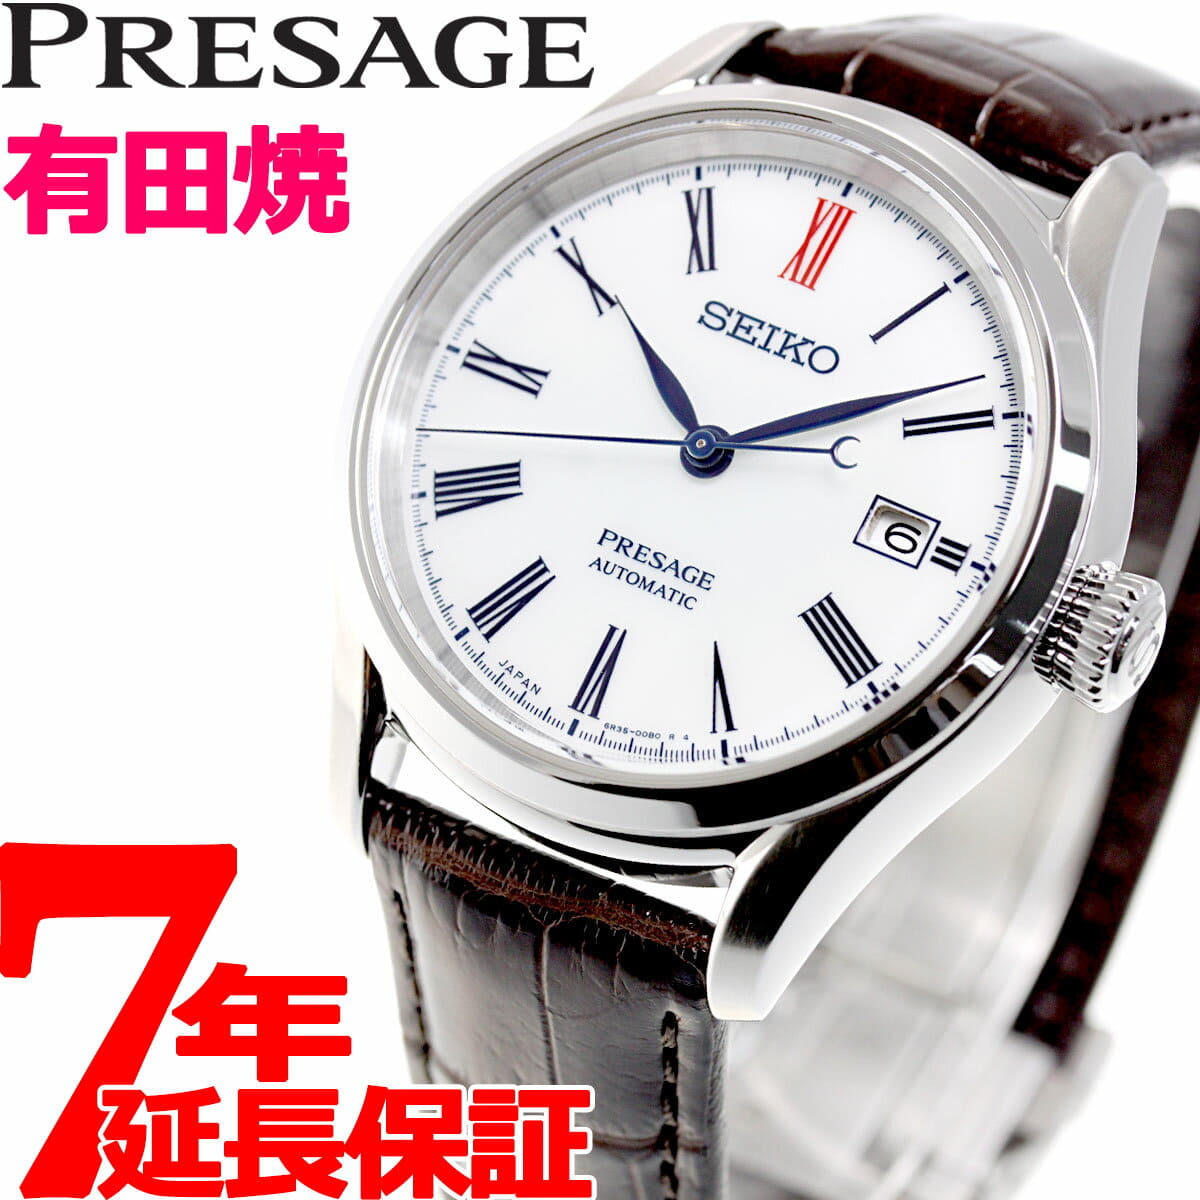 New]up to 2,000 & up to 53 times! Distribution prestige line SARX061 for  exclusive use of April 23 20:00 - April 28 1:59 loan SEIKO Presage SEIKO  PRESAGE Automatic winding Arita ware